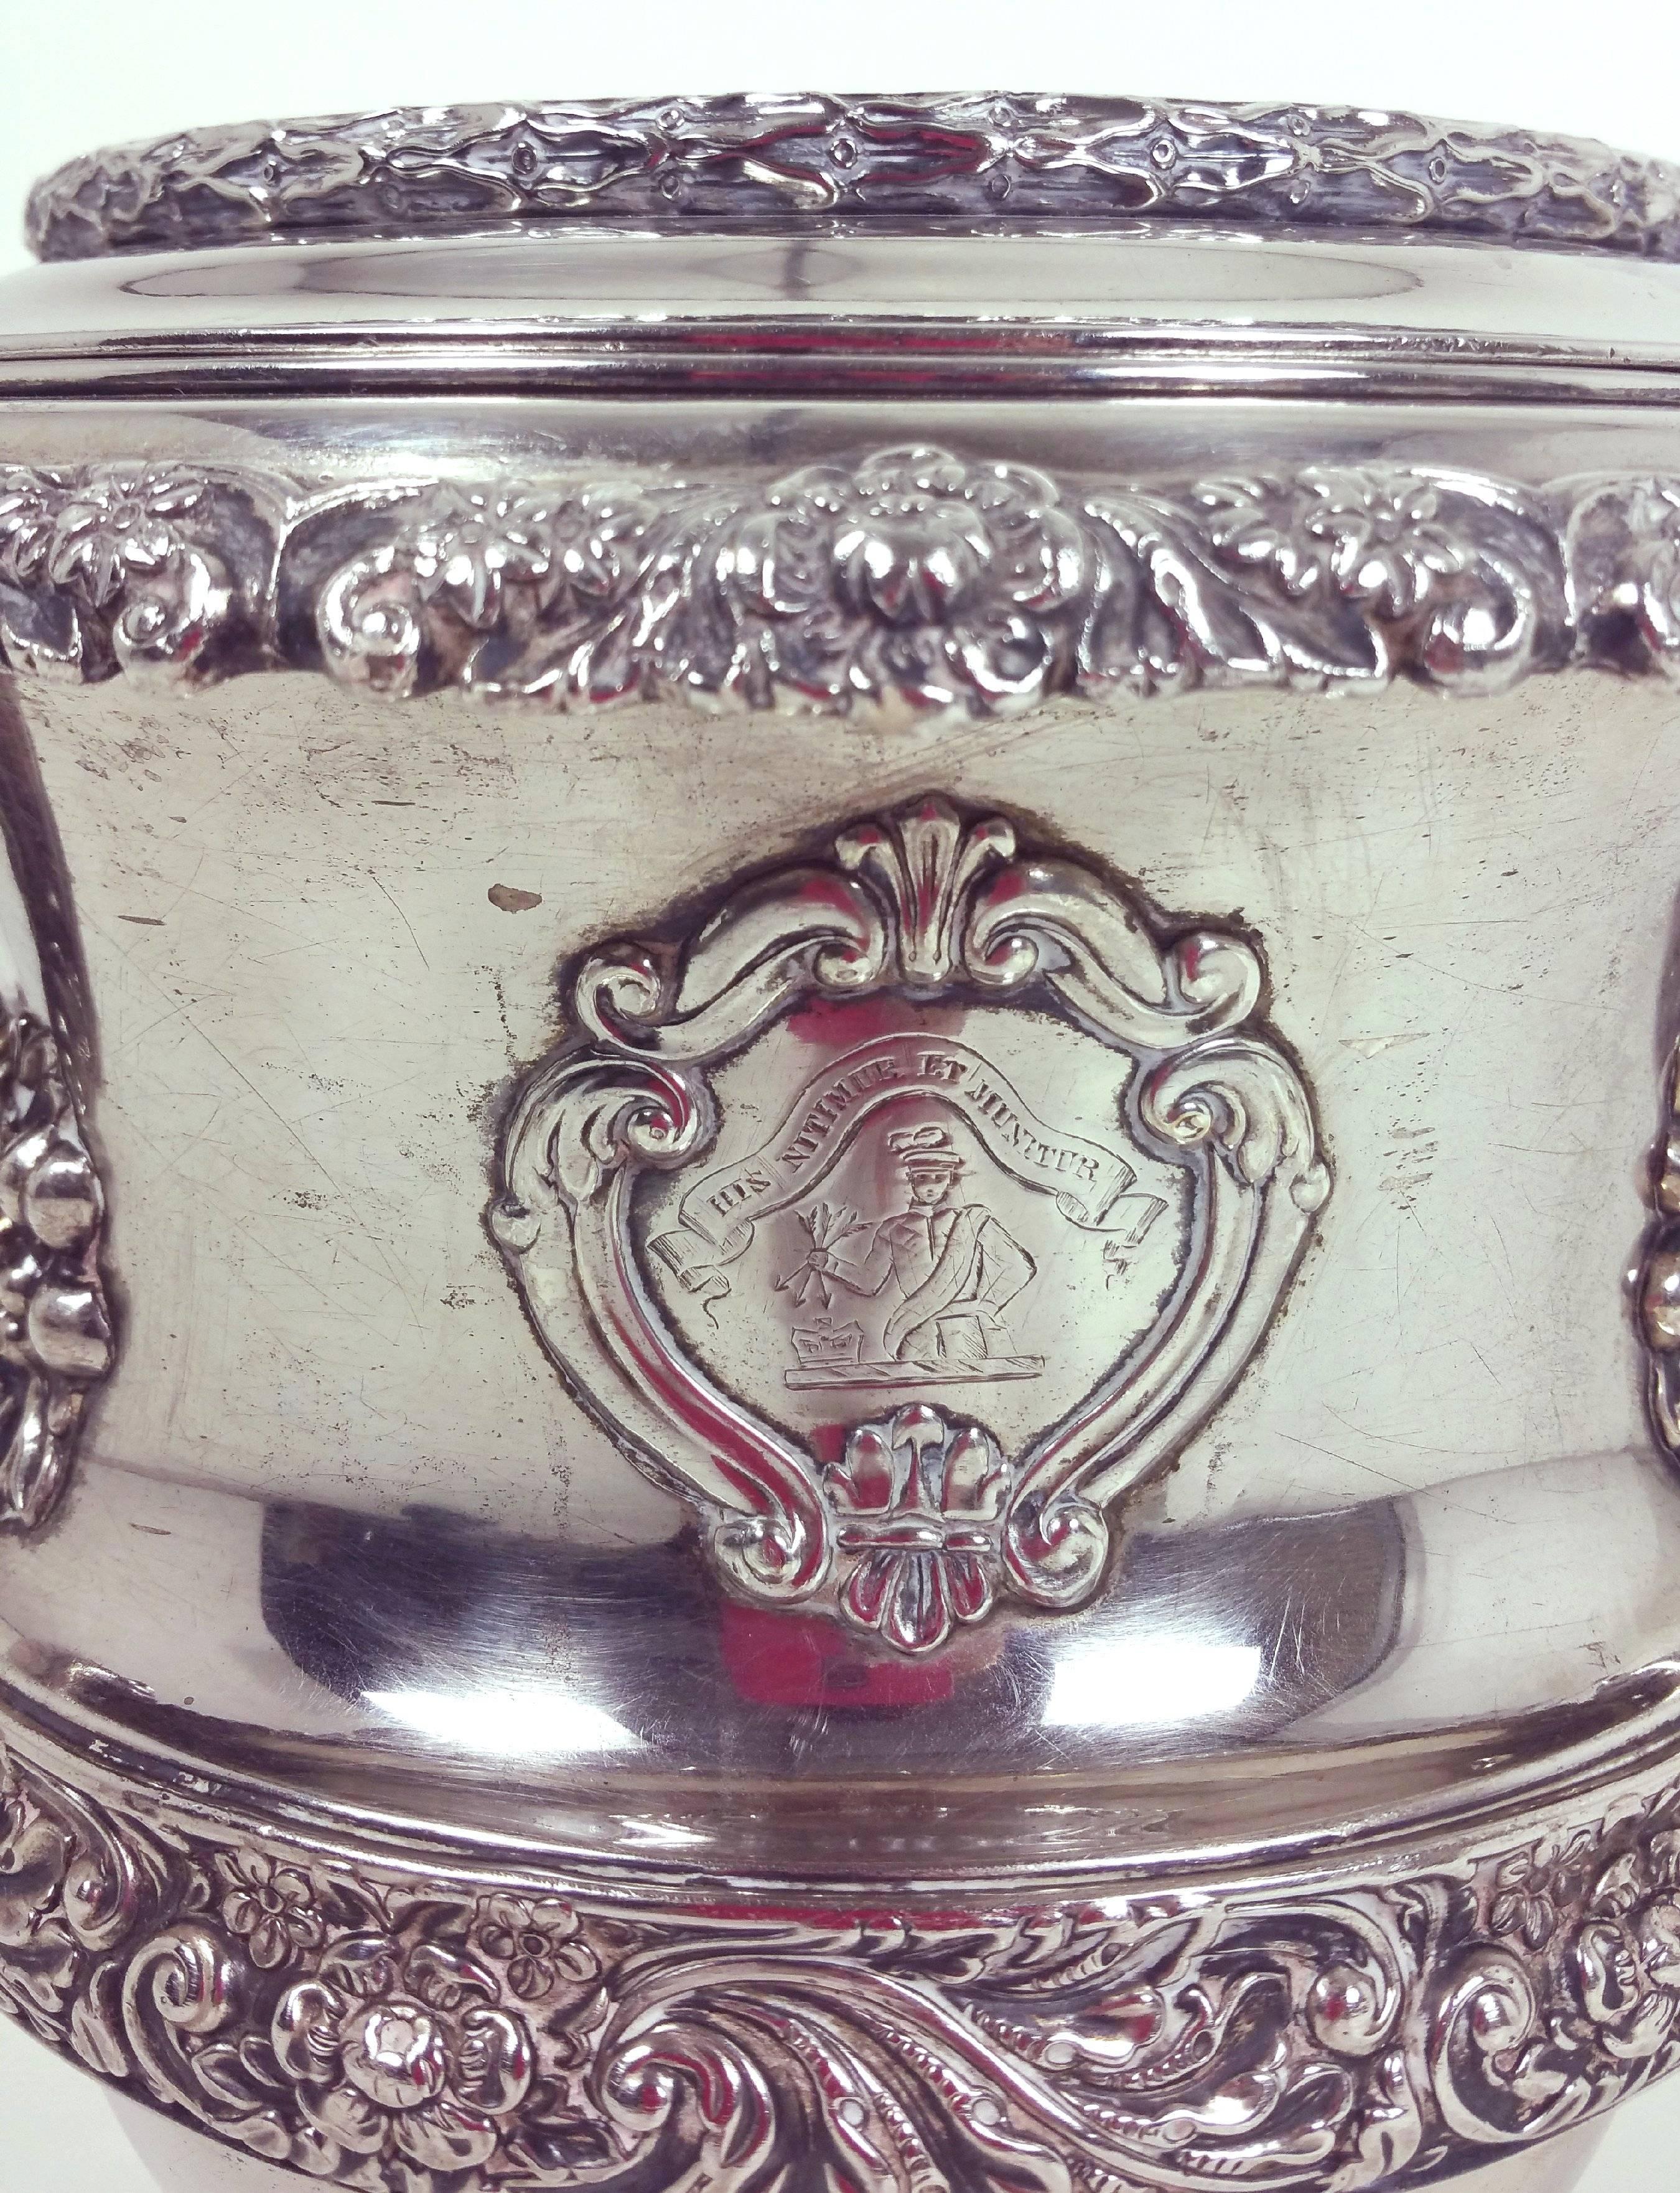 This handsome and ornately detailed 19th century silver plated champagne cooler features a twin handle design with a heraldic cartouche. The cooler has several bordering trims of acanthus leaves, flowers and fruit, as well as a top rim which is